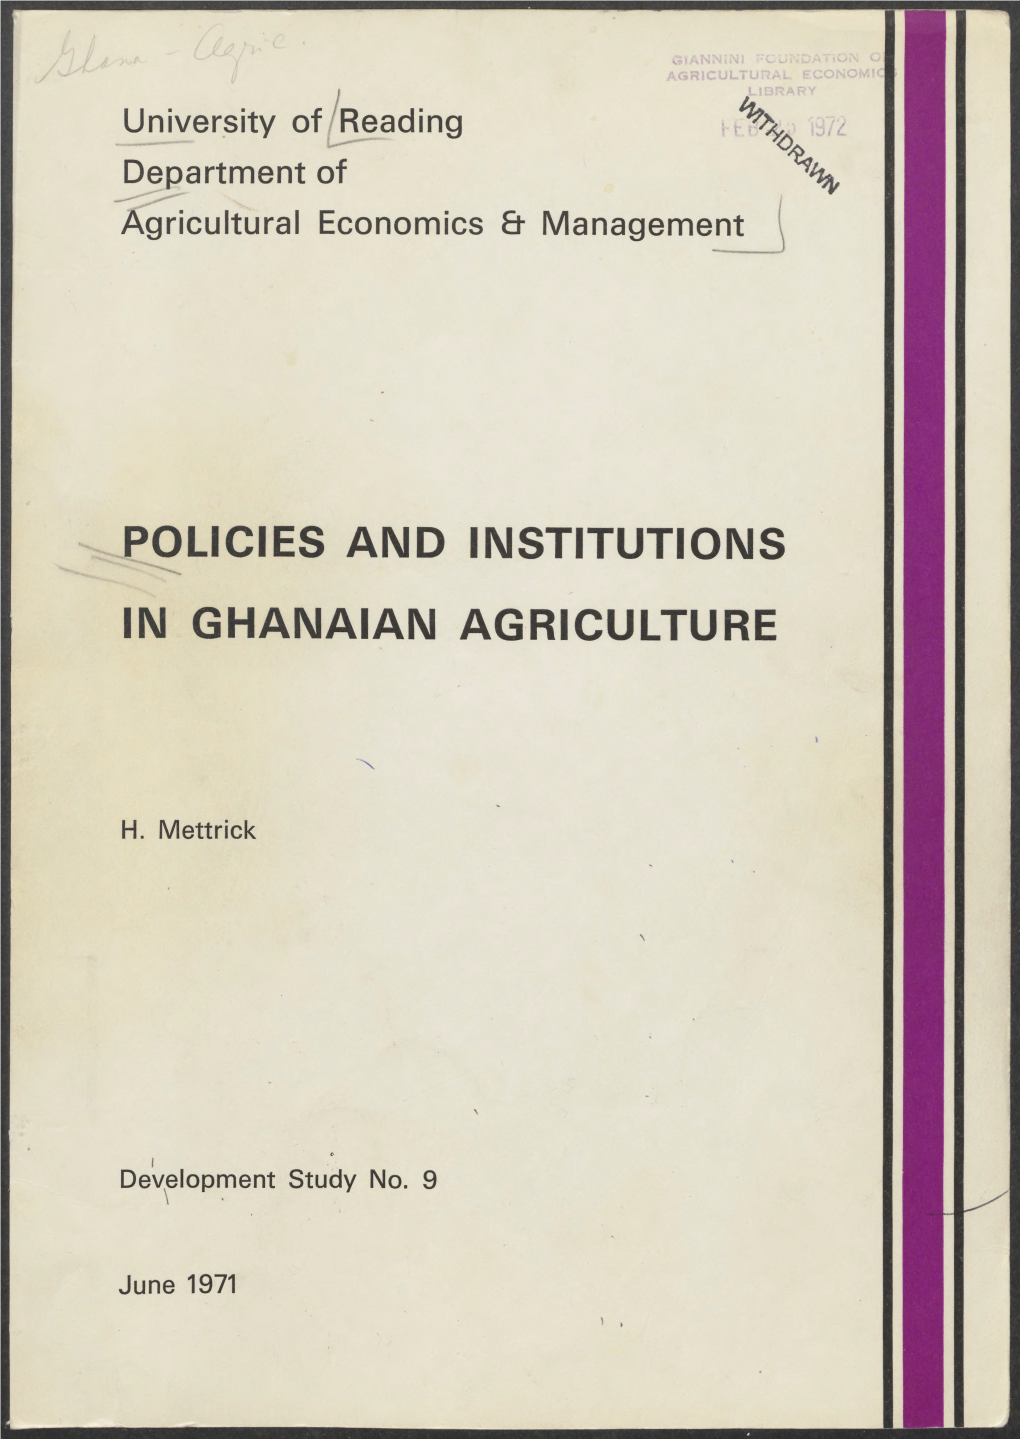 Policies and Institutions in Ghanaian Agriculture